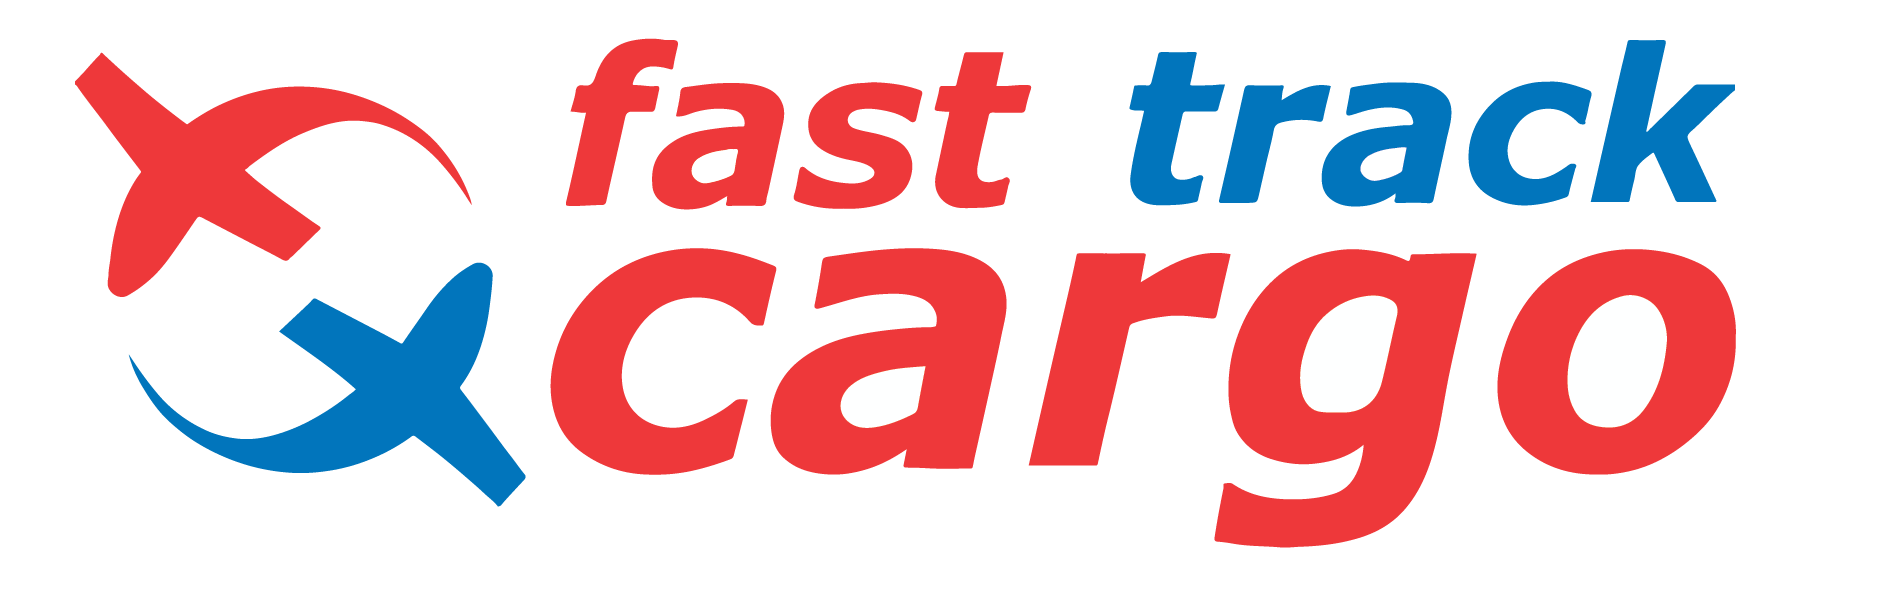 FastTrack Cargo Clearing and Forwarding LLC